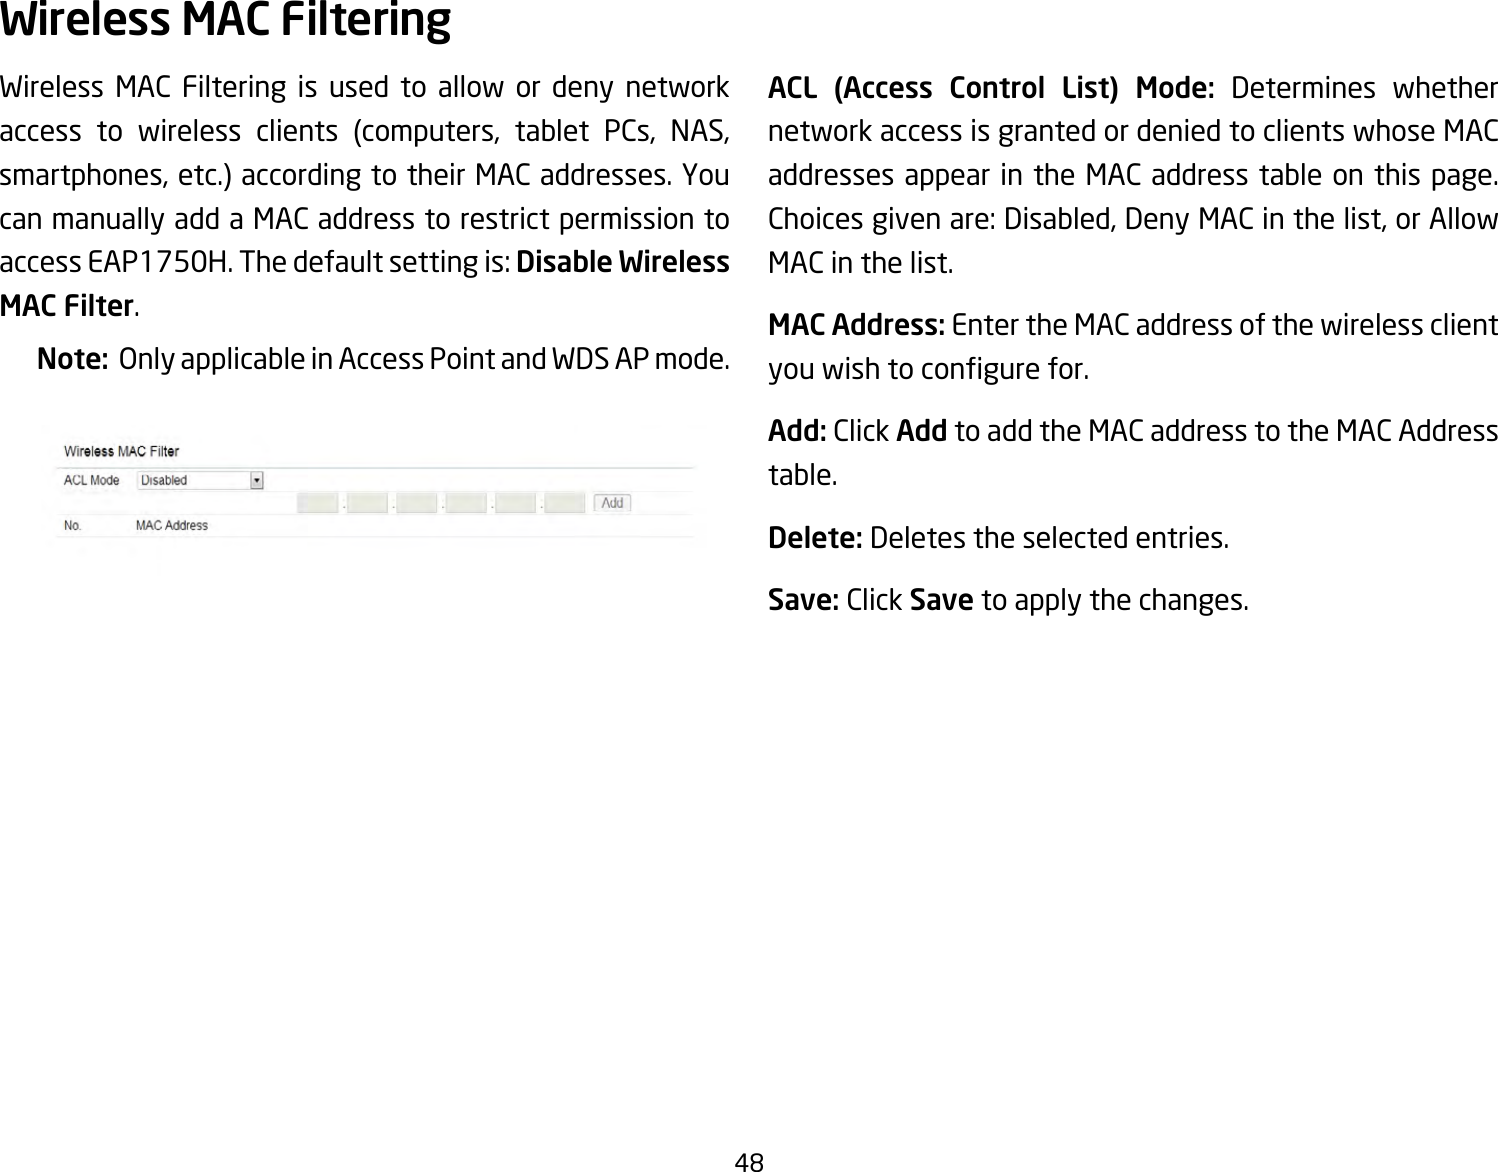 48Wireless MAC Filtering is used to allow or deny network access to wireless clients (computers, tablet PCs, NAS,smartphones,etc.)accordingtotheirMACaddresses.Youcan manually add a MAC address to restrict permission to accessEAP1750H.Thedefaultsettingis:Disable Wireless MAC Filter.Note:  Only applicable in Access Point and WDS AP mode.ACL (Access Control List) Mode: Determines whether network access is granted or denied to clients whose MAC addresses appear in the MAC address table on this page. Choicesgivenare:Disabled,DenyMACinthelist,orAllowMAC in the list.MAC Address: Enter the MAC address of the wireless client youwishtocongurefor.Add: Click Add to add the MAC address to the MAC Address table.Delete: Deletes the selected entries.Save: Click Save to apply the changes.Wireless MAC Filtering